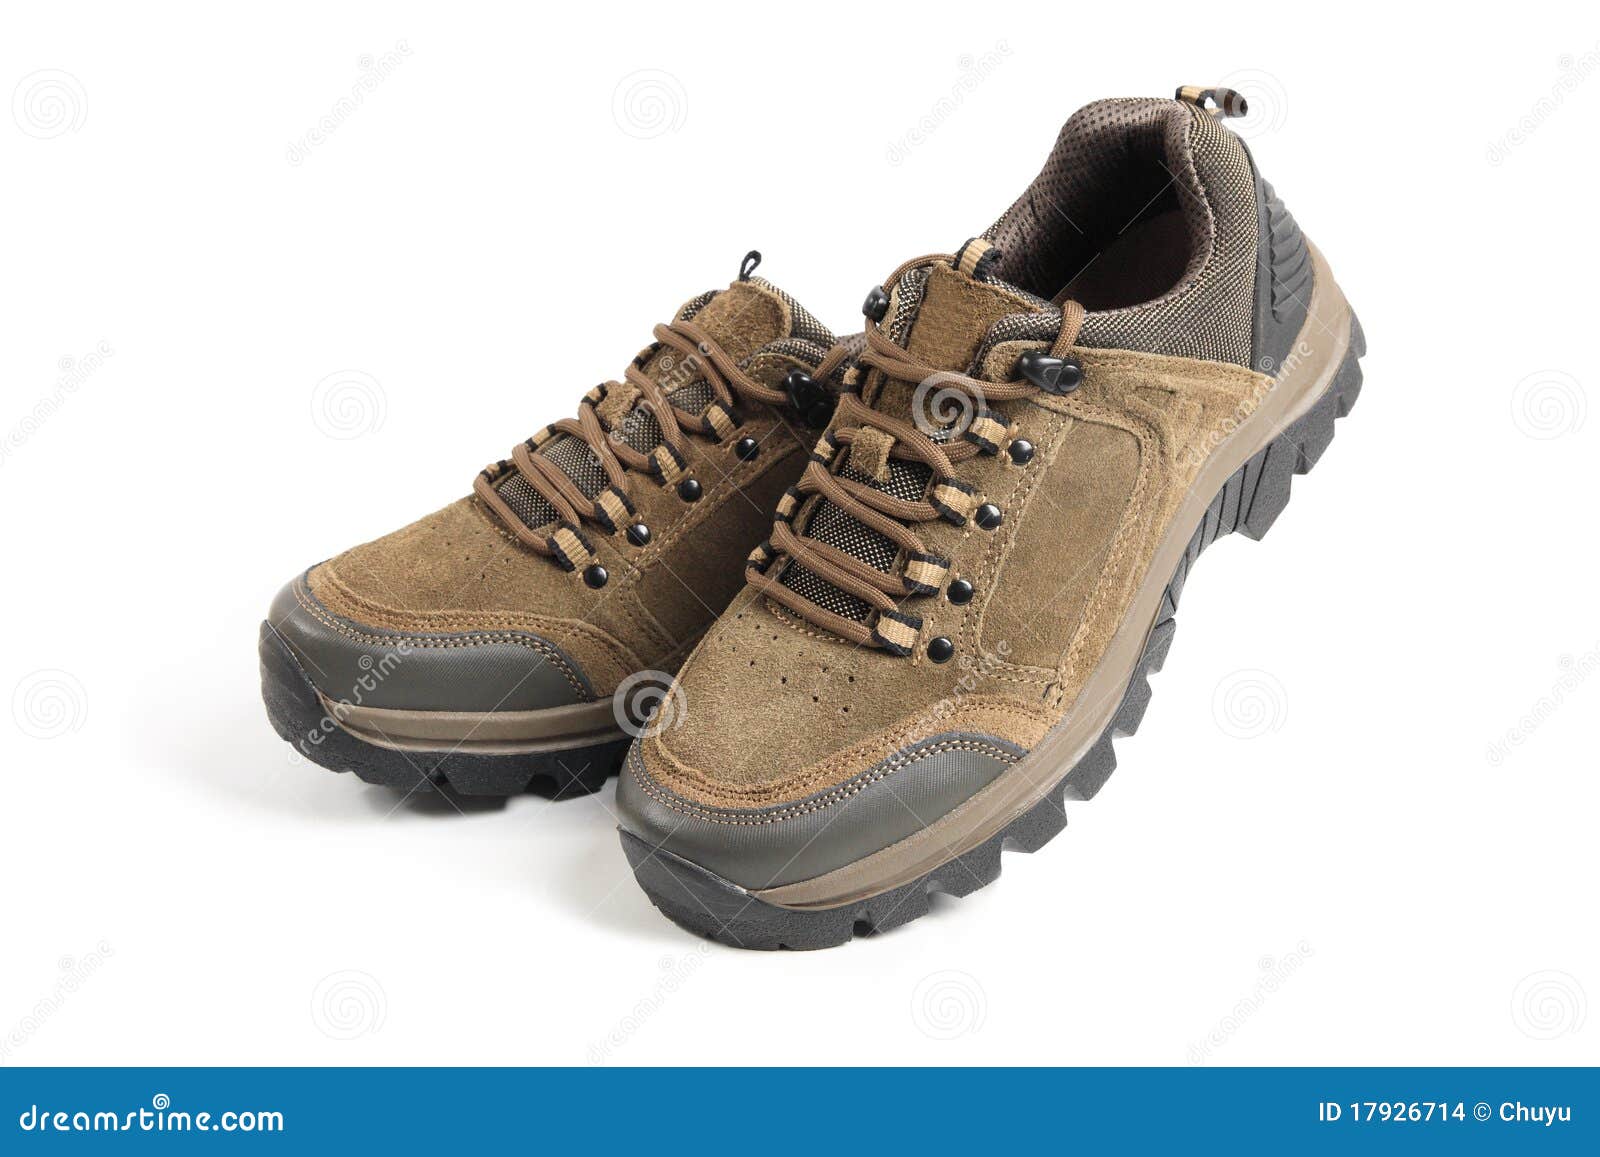 mountaineering hiking shoes